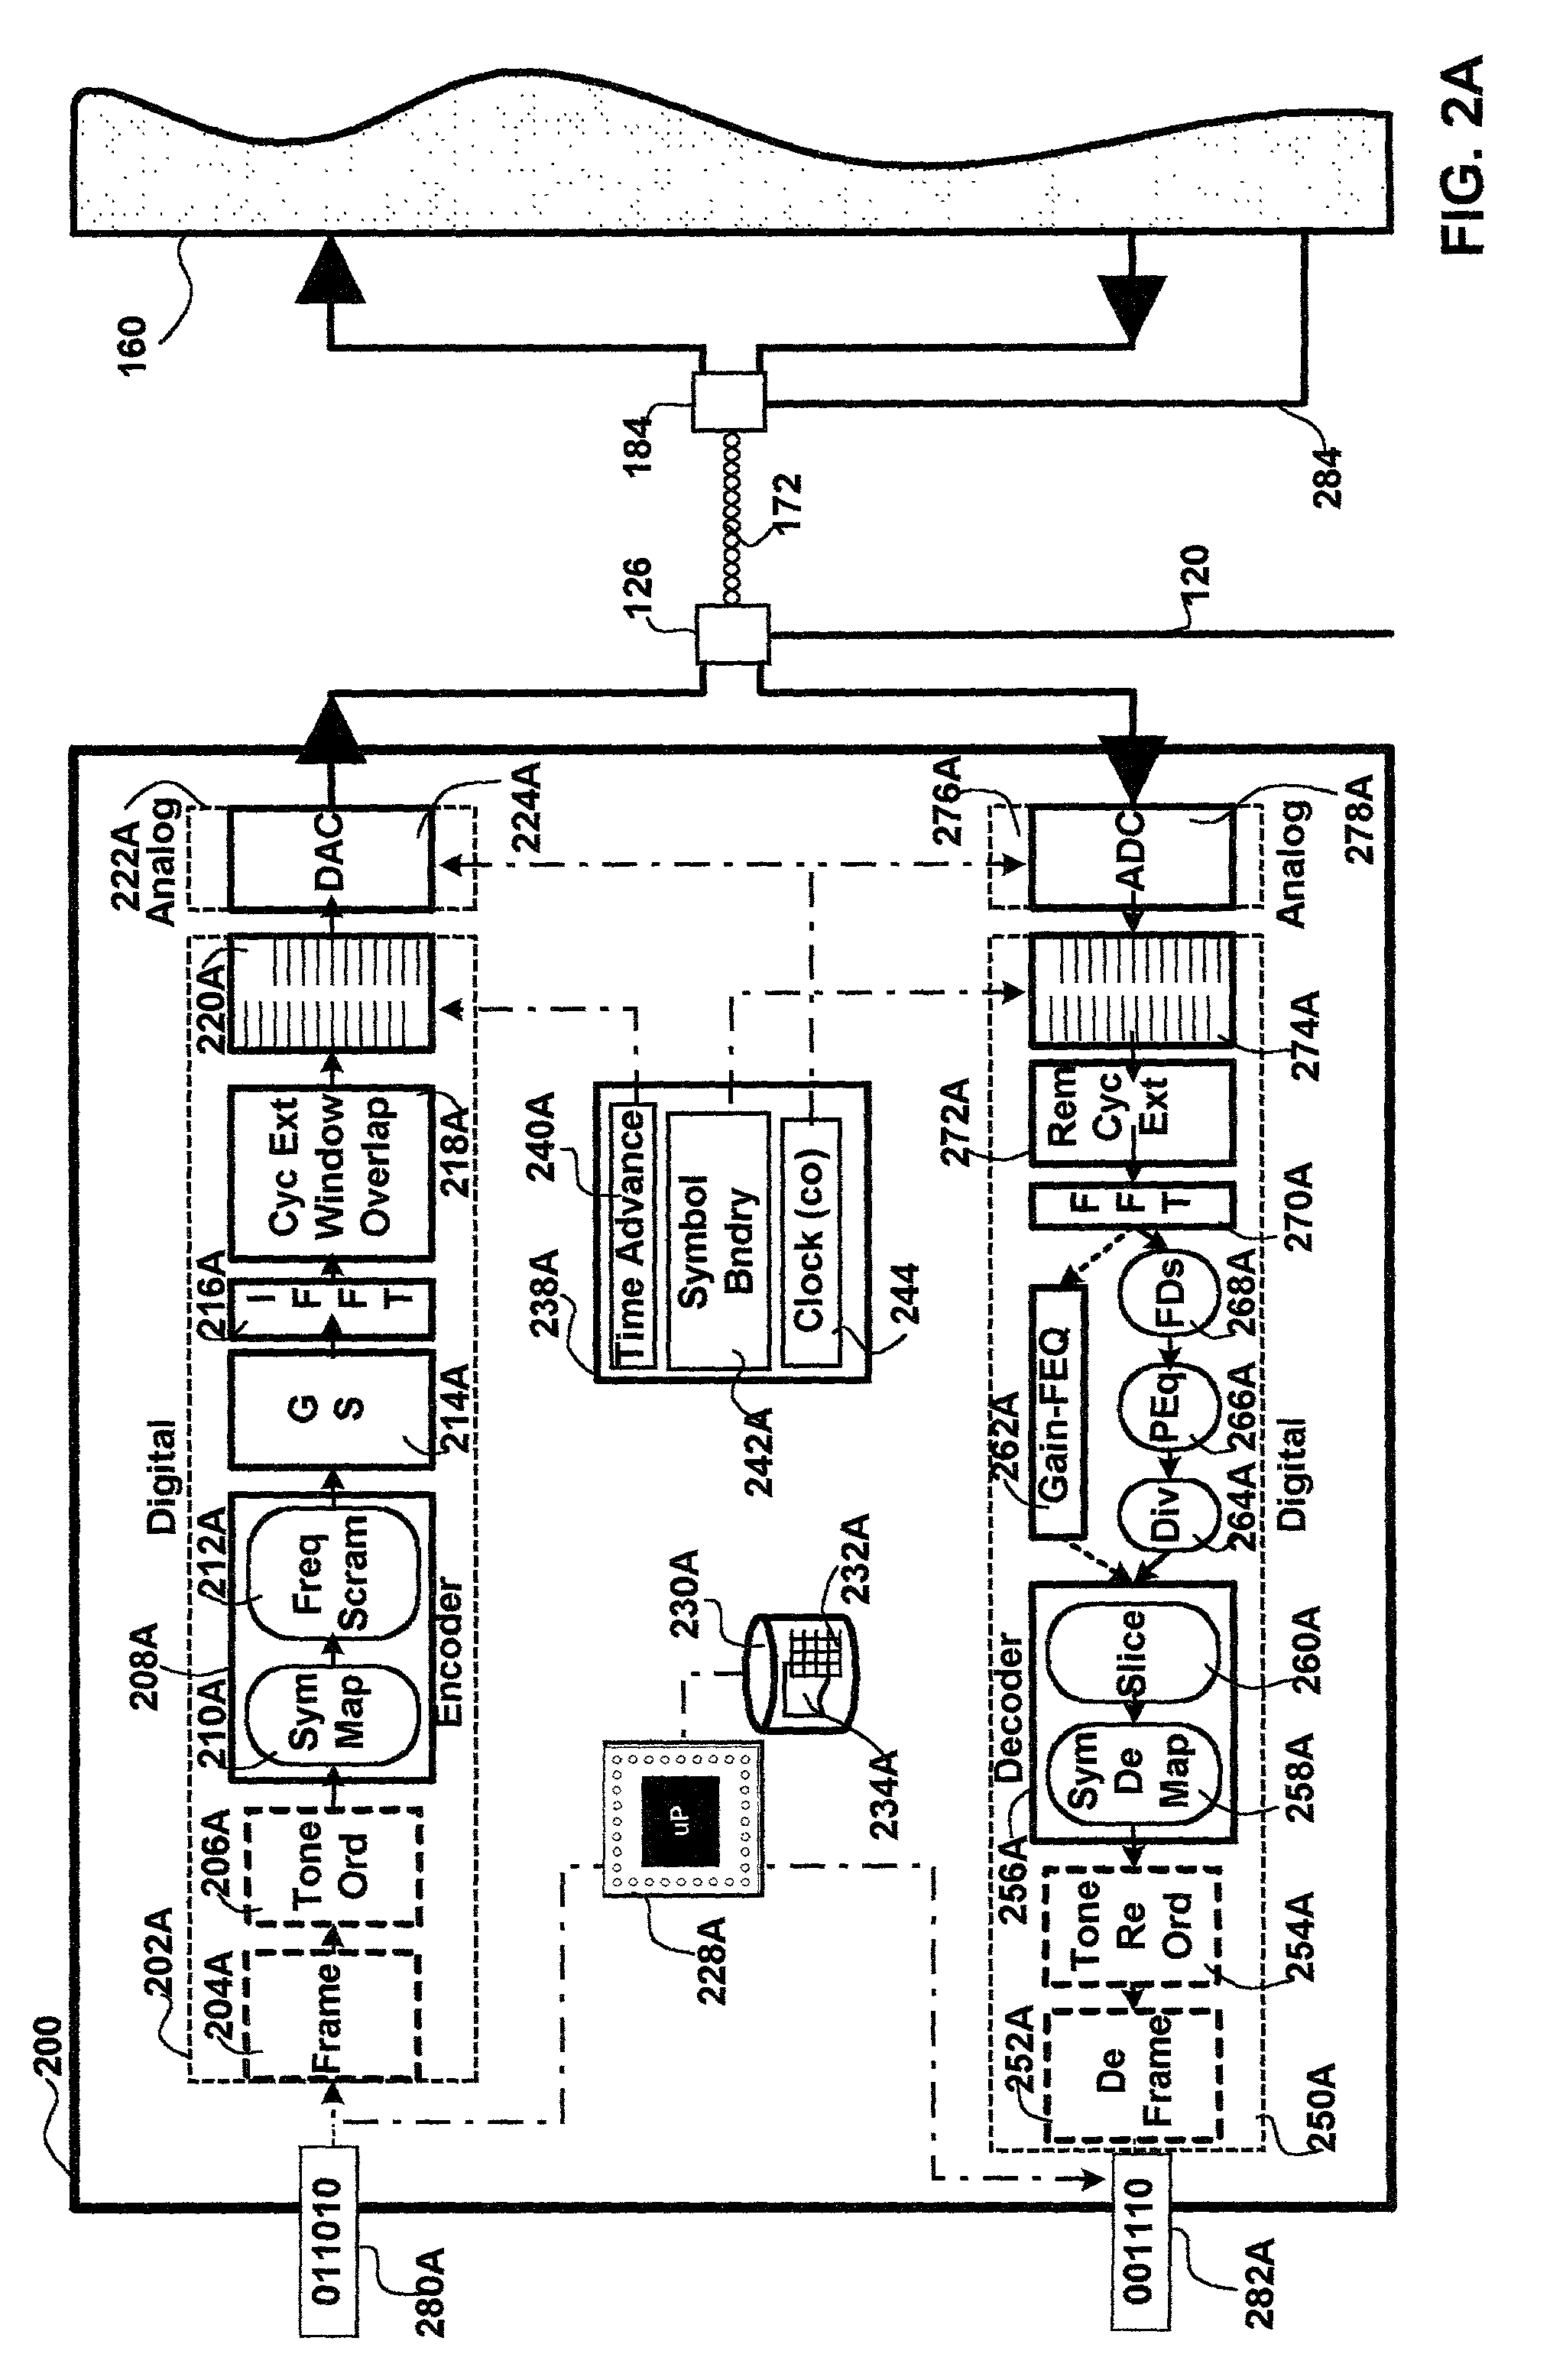 Method and apparatus for initializing modem communications